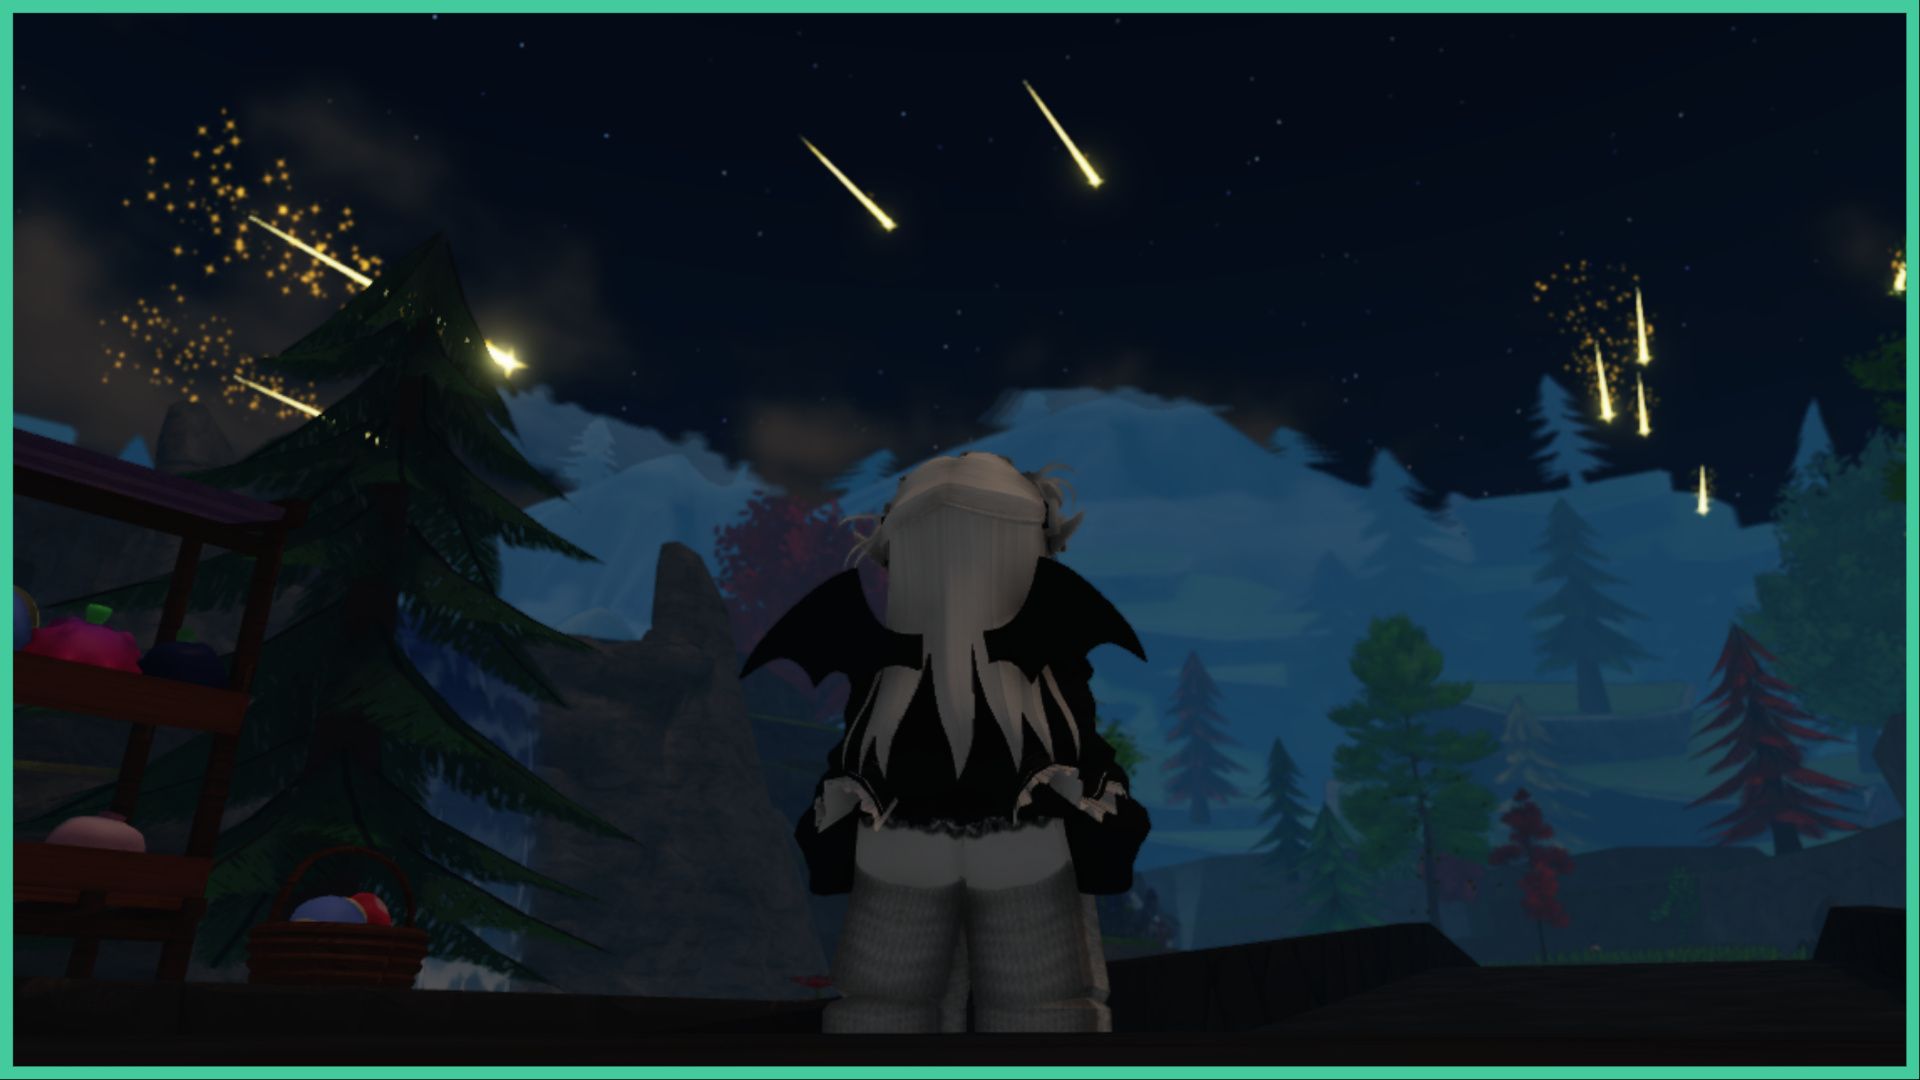 feature image for our tales of tanorio tier list, the image features a screenshot of a roblox player looking up to the sky as glowing shooting stars fly across the dark sky, there are trees covered in mist in the far distance, as a pine tree stands to the left of the player, next to a wooden stall with vegetables and a basket with more vegetables inside